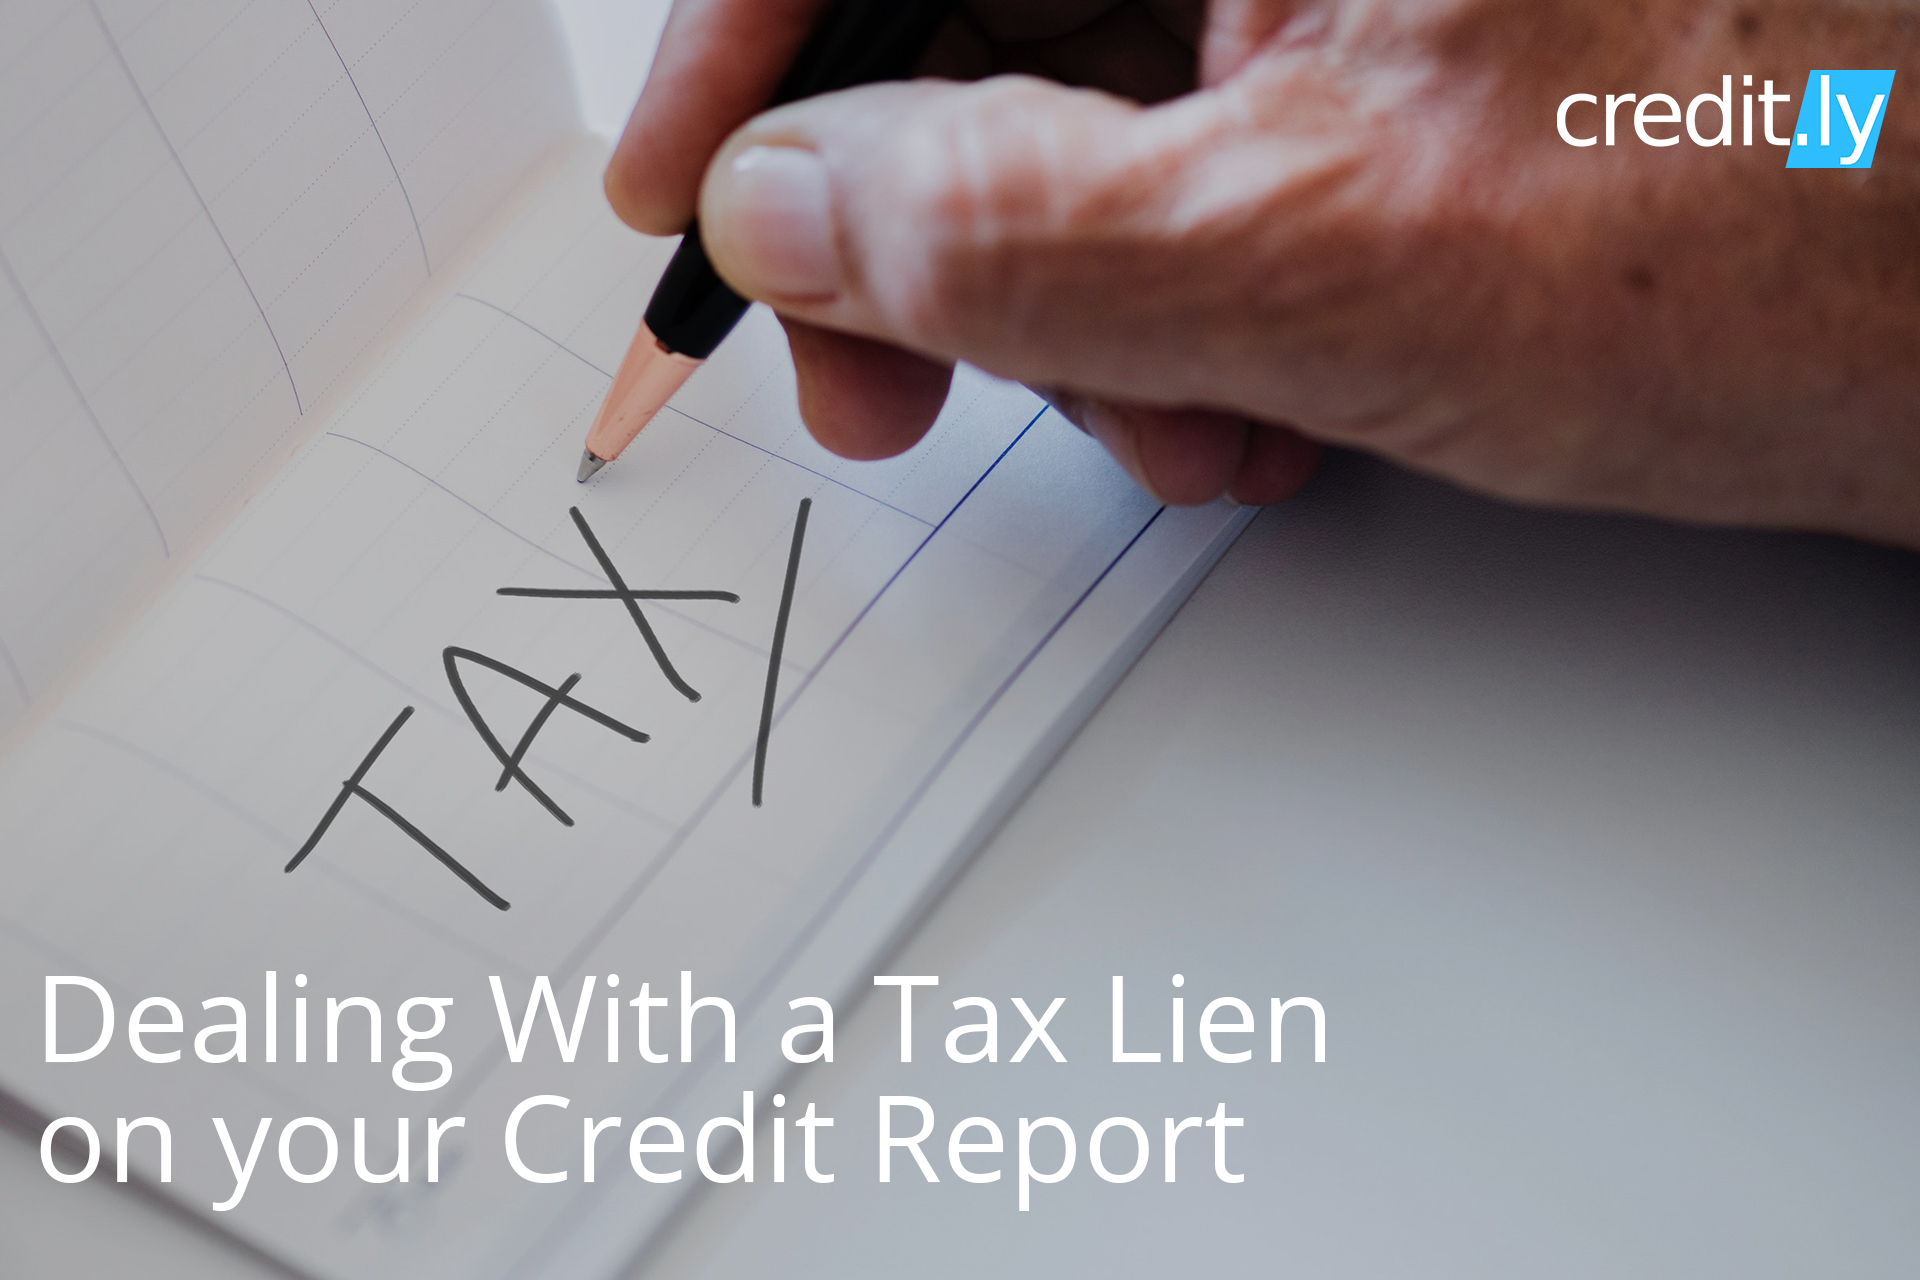 Dealing With a Tax Lien on your Credit Report